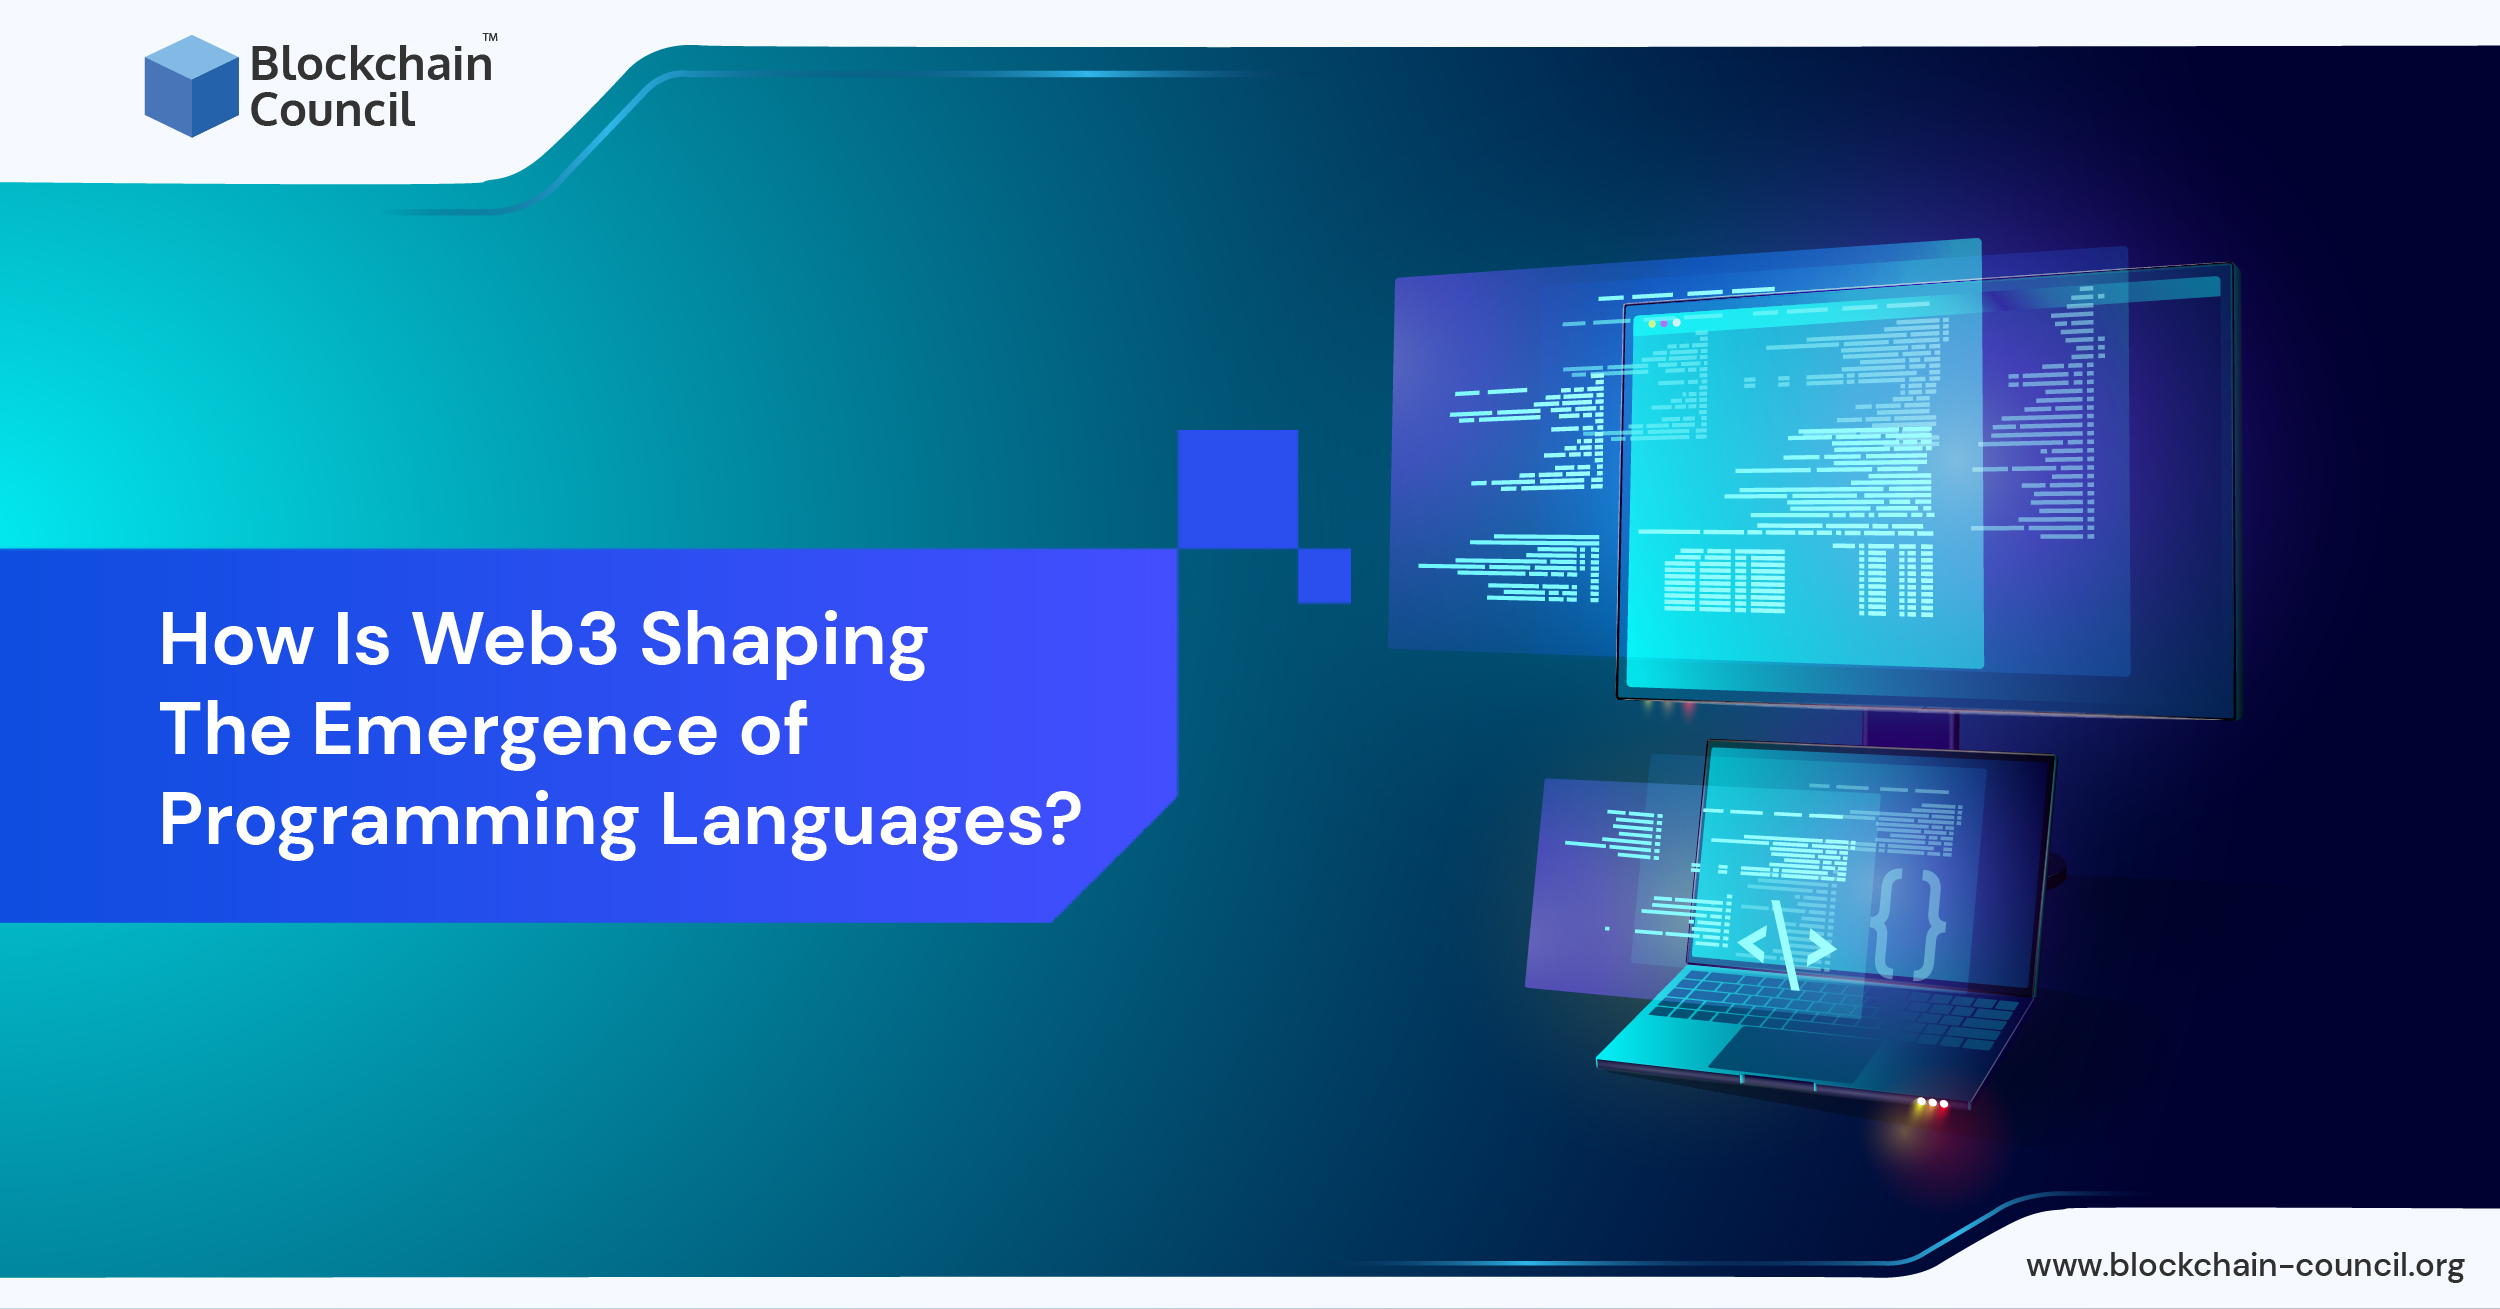 How Is Web3 Shaping The Emergence of Programming Languages